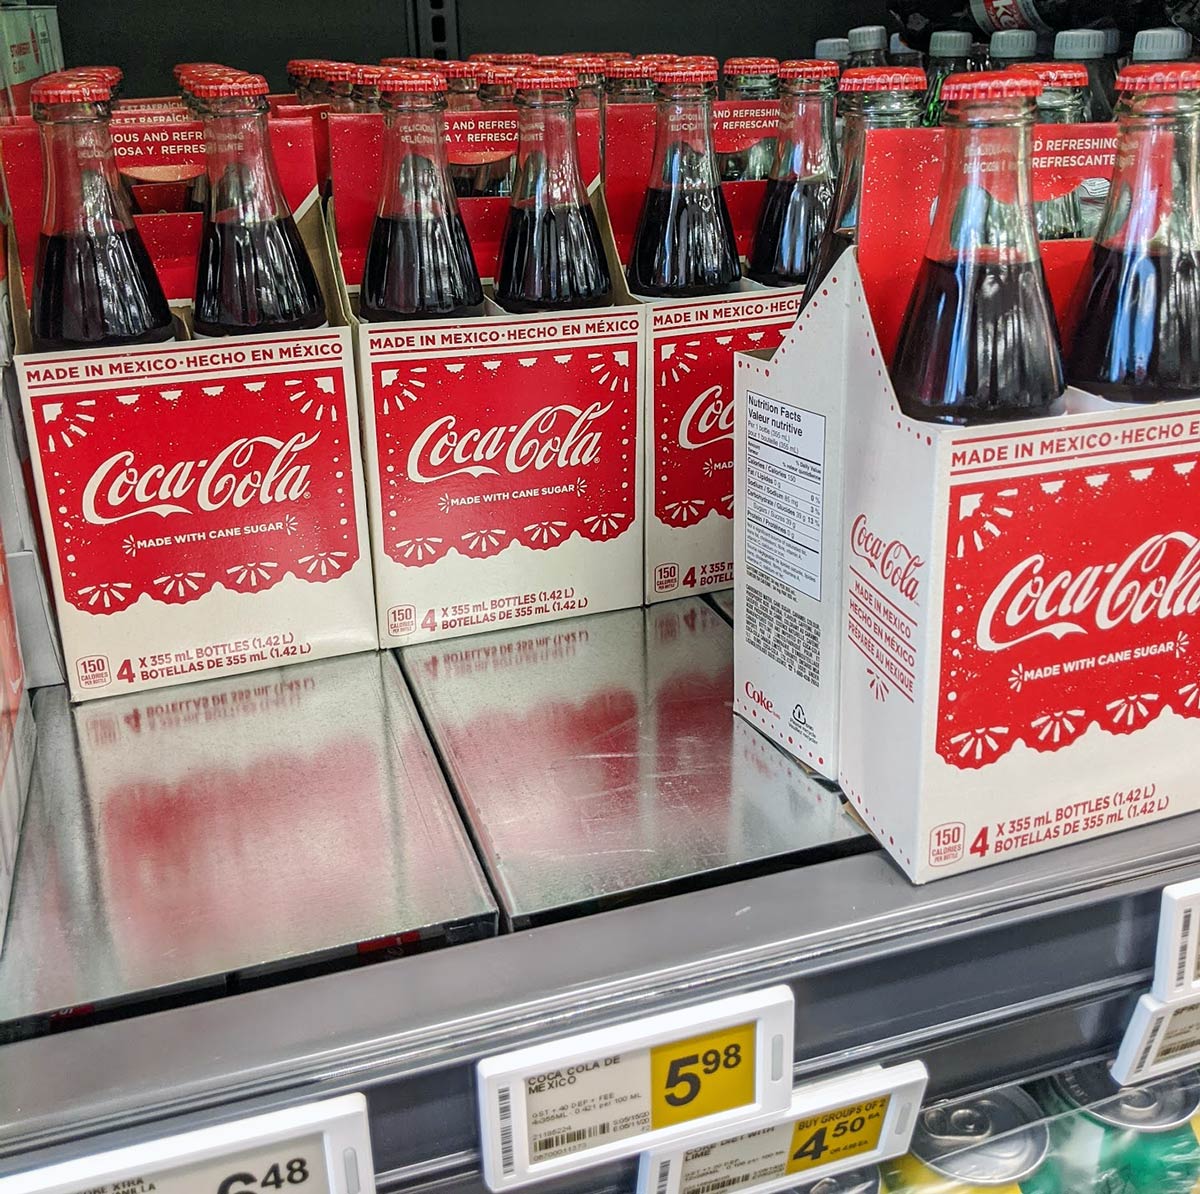 Real Canadian Superstore East Village in Calgary has real cane sugar coke